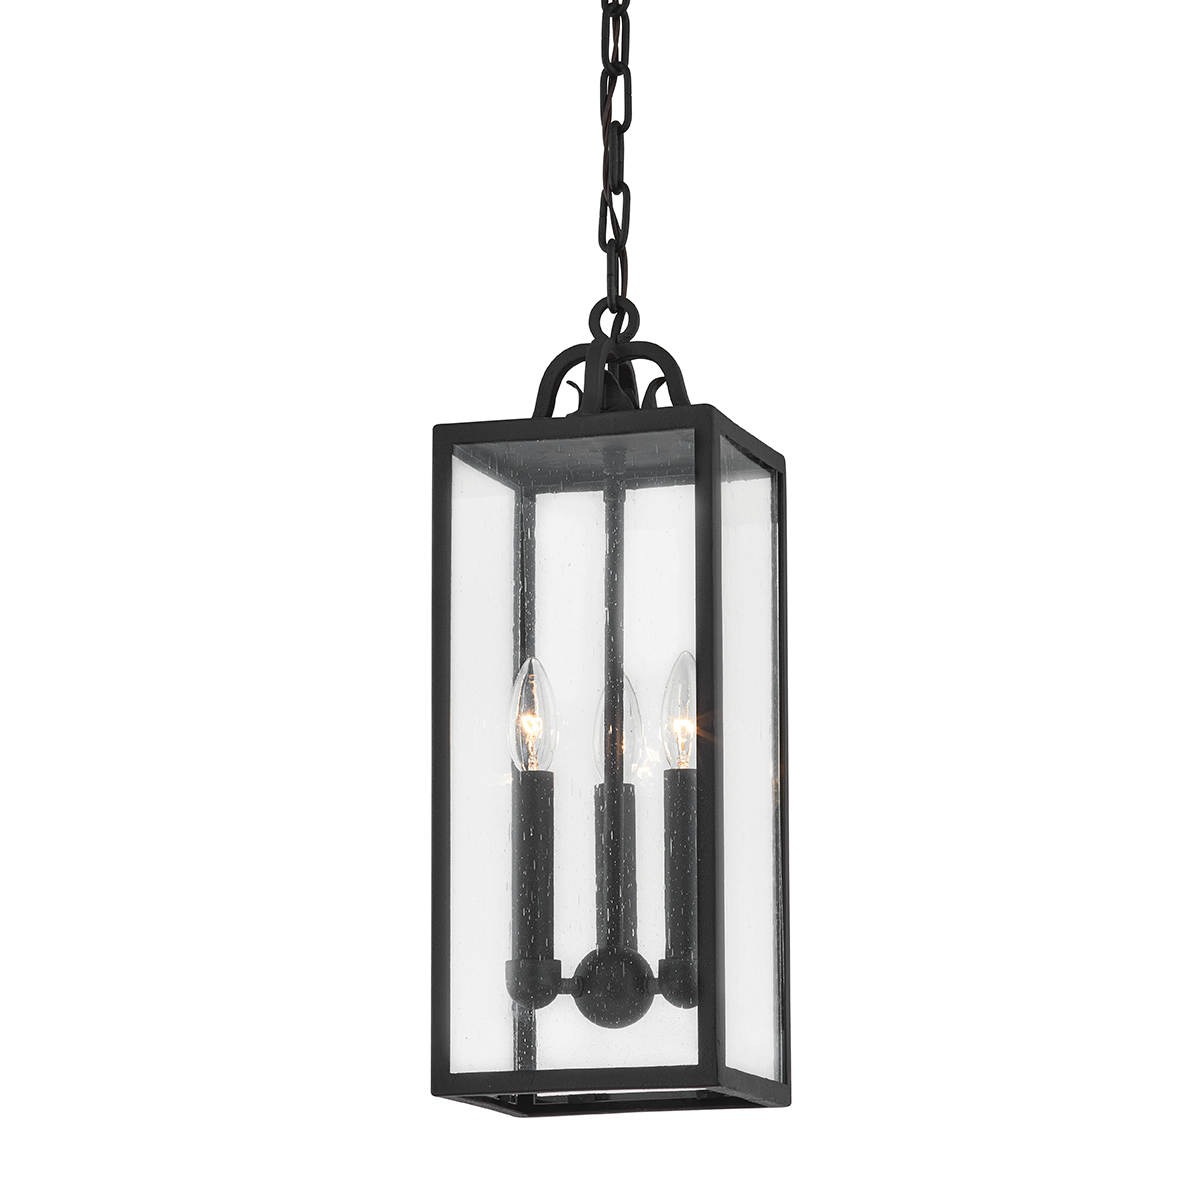 Troy CAIDEN 3 LIGHT EXTERIOR LANTERN F2066 Outdoor l Wall Troy Lighting   